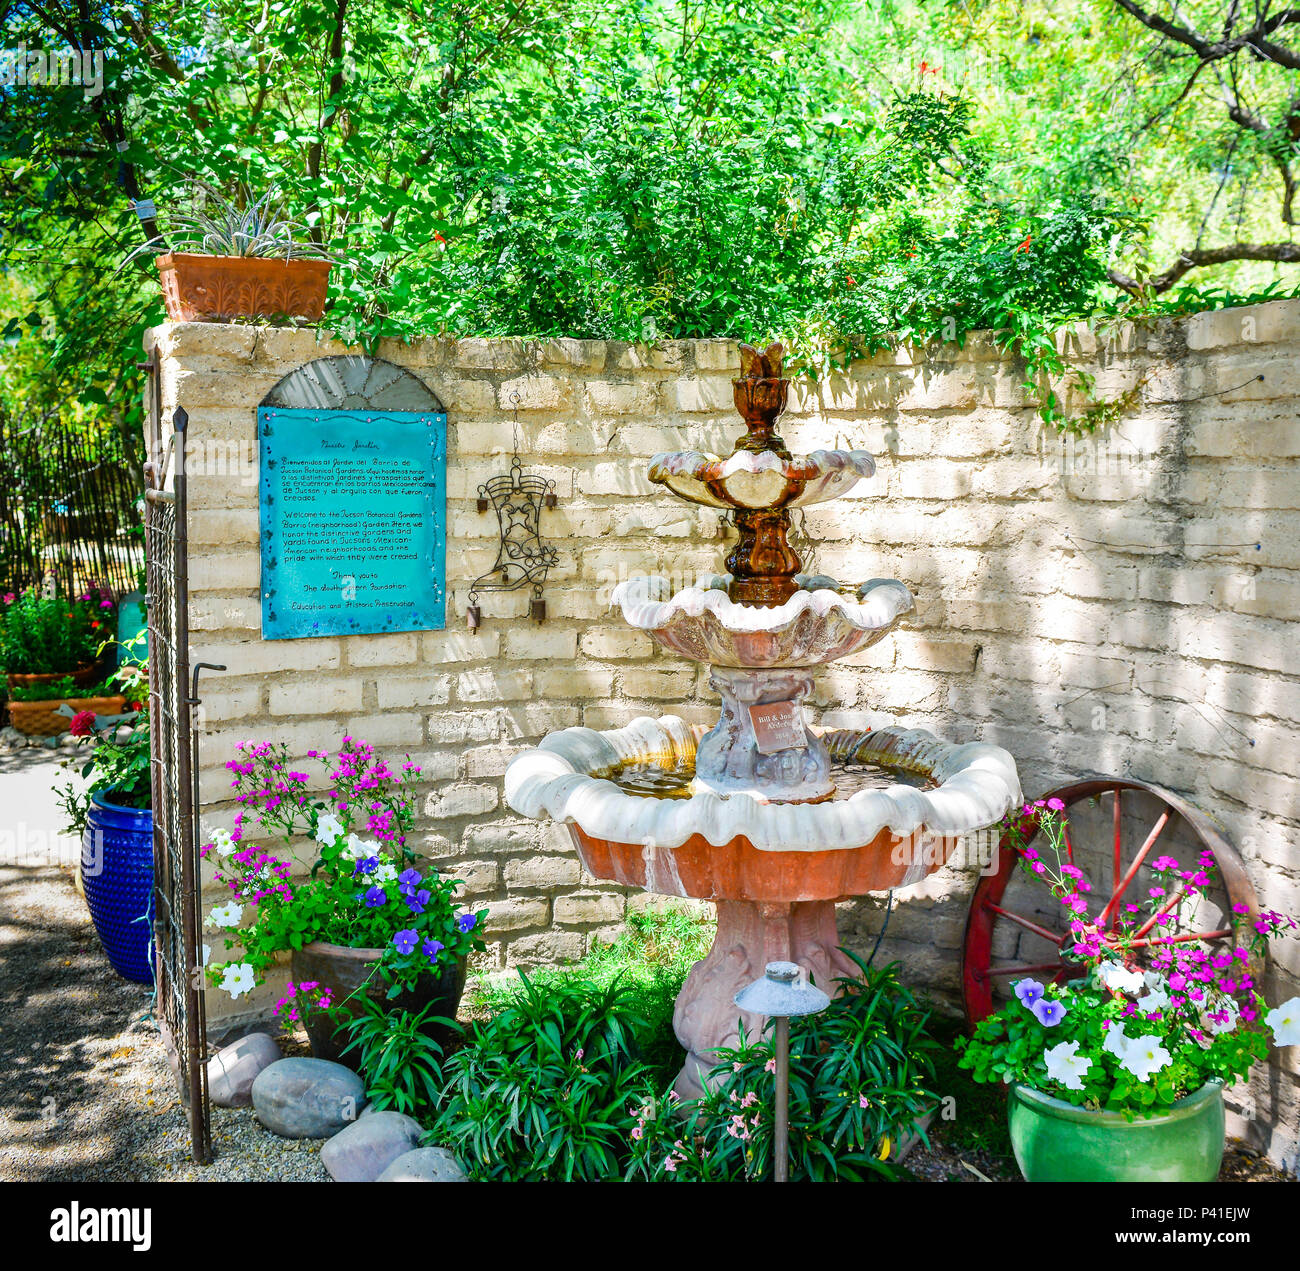 Lovely southwestern style garden with water fountain, dedicated to the neighborhood by the Tucson Botanical Gardens in Tucson, AZ Stock Photo